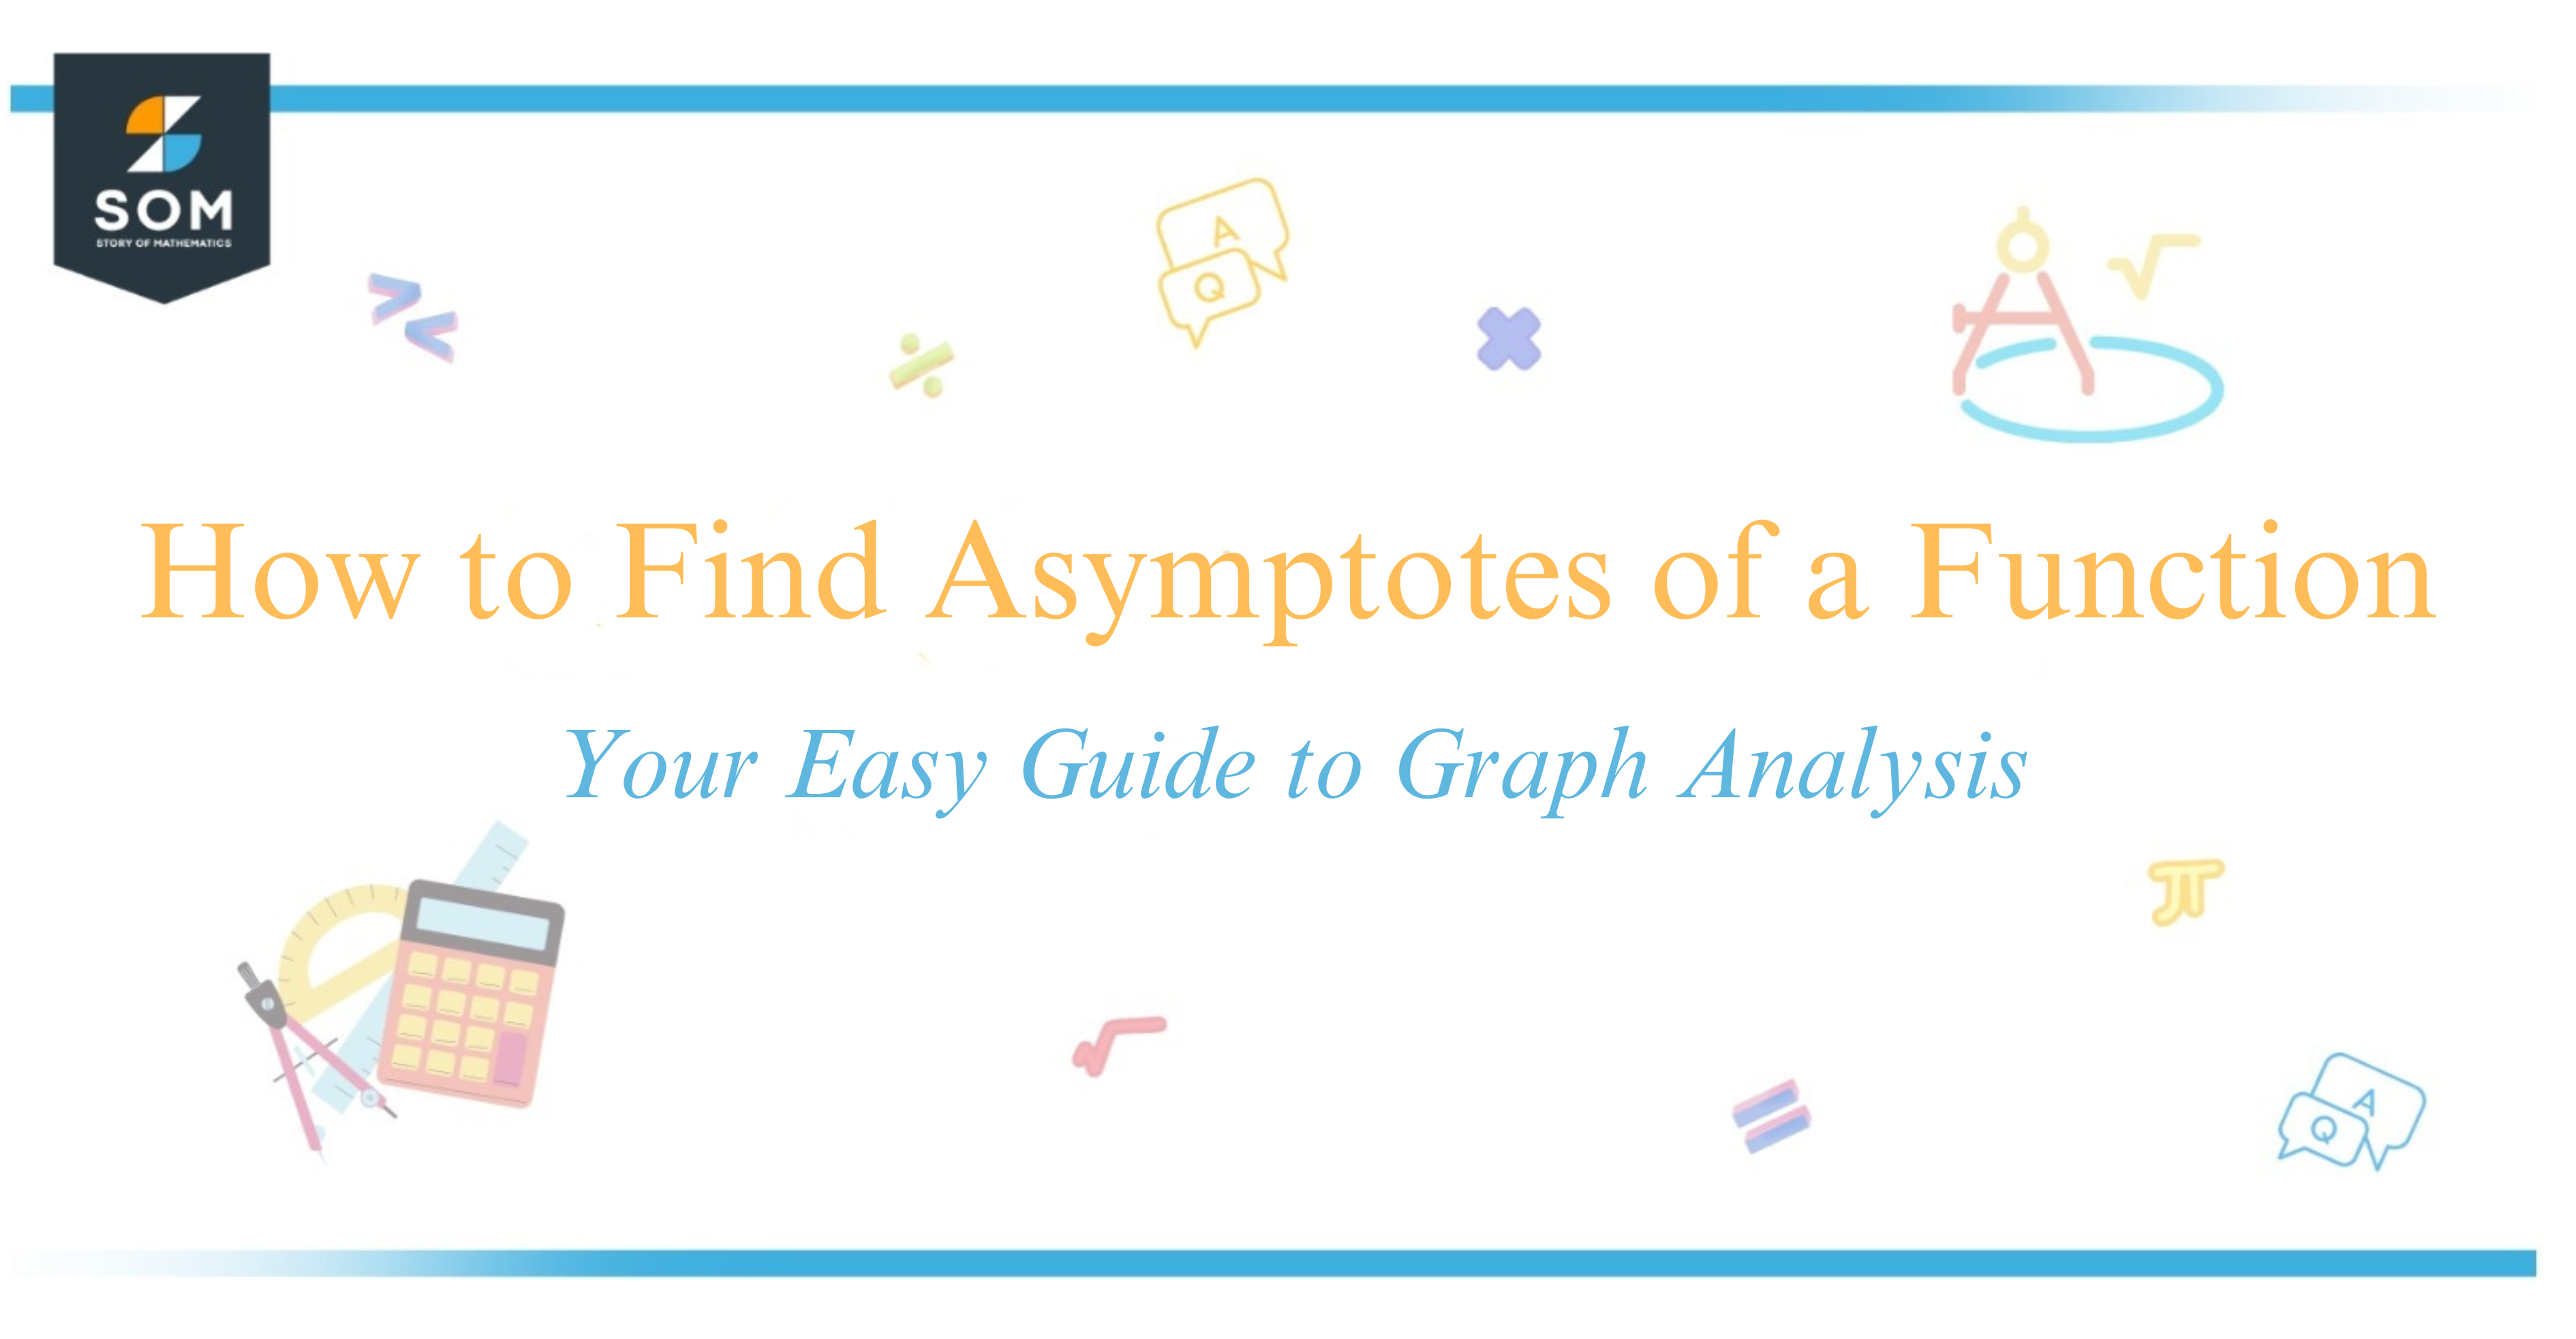 How to Find Asymptotes of a Function Your Easy Guide to Graph Analysis